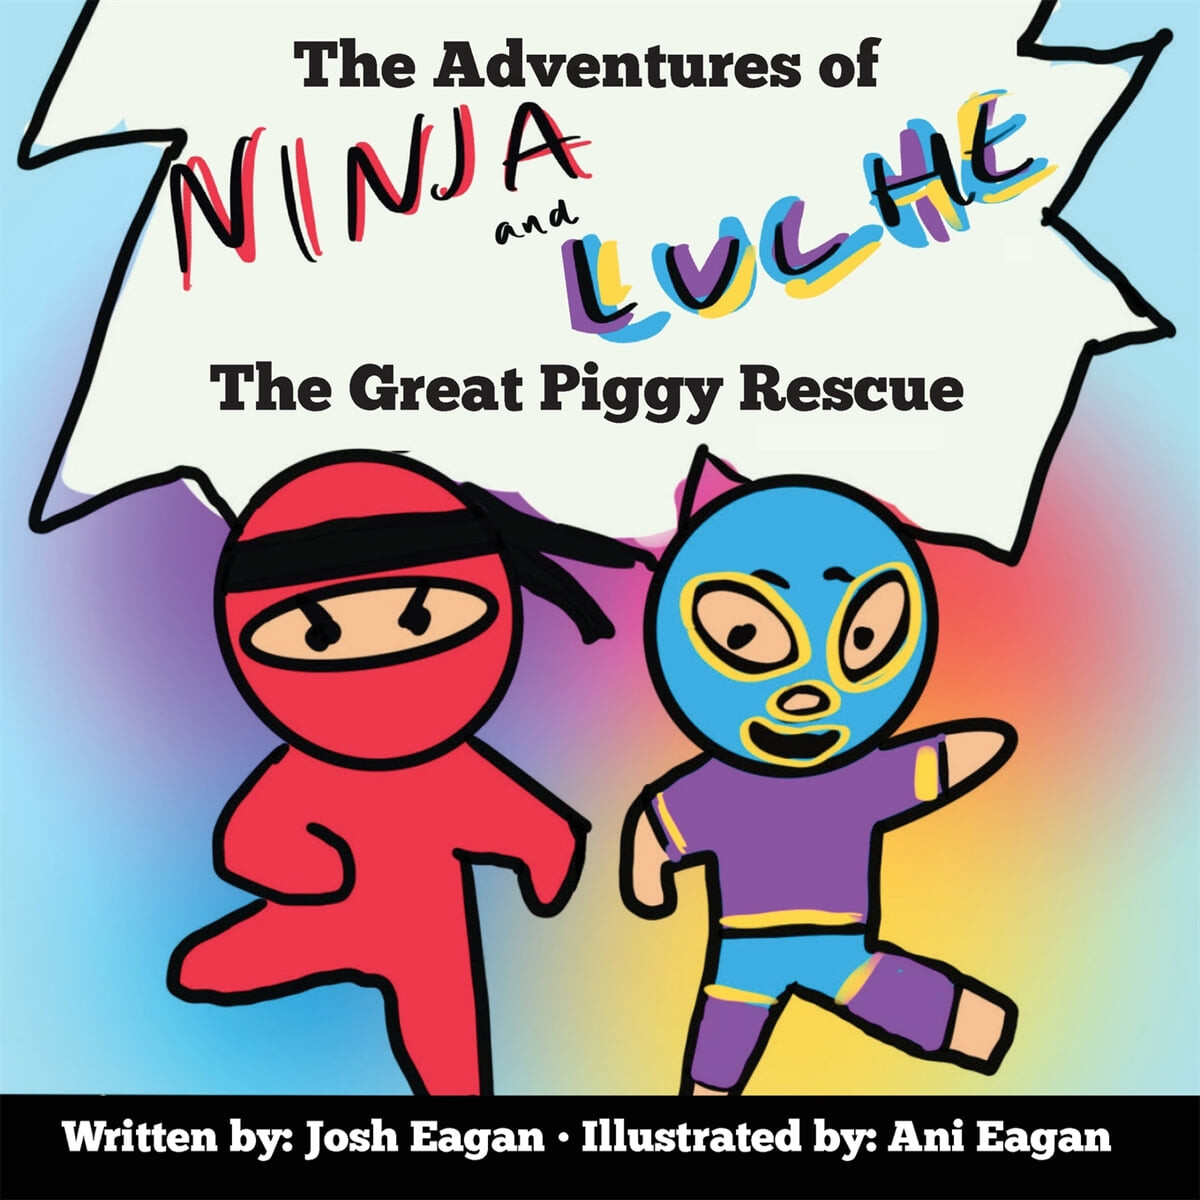 The Adventures of Ninja and Luche (The Great Piggy Rescue)